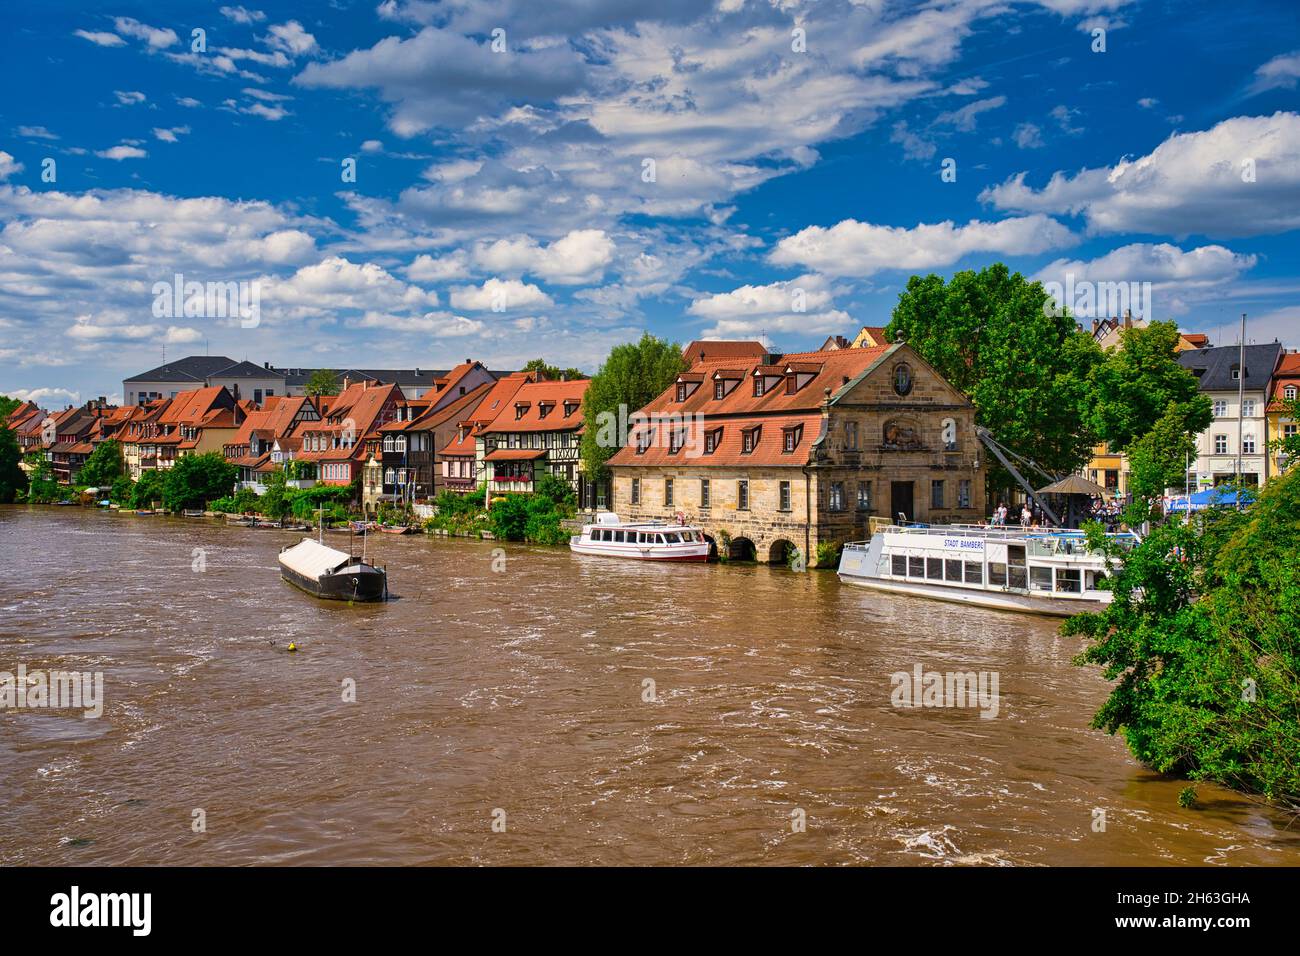 the former fishing settlement 'little venice' in the bamberg island town,unesco world heritage city of bamberg,upper franconia,franconia,bavaria,germany Stock Photo